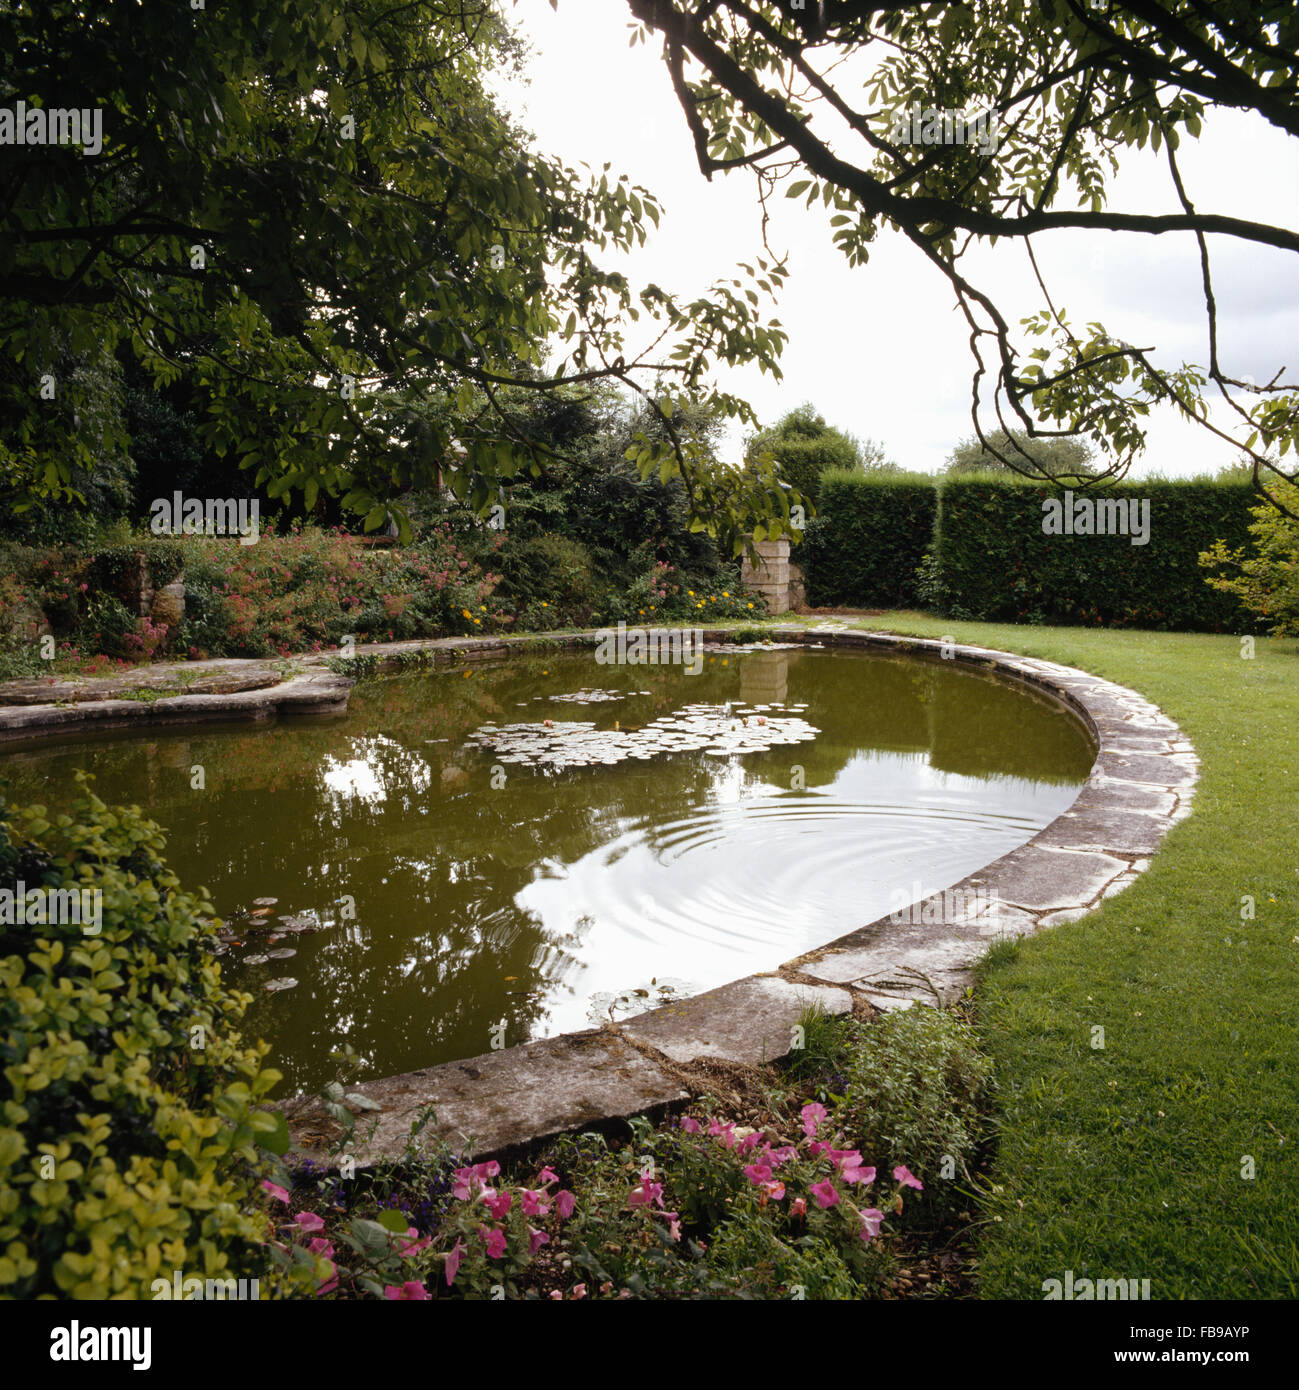 Oval pool edged with stone in a large country garden in summer Stock Photo